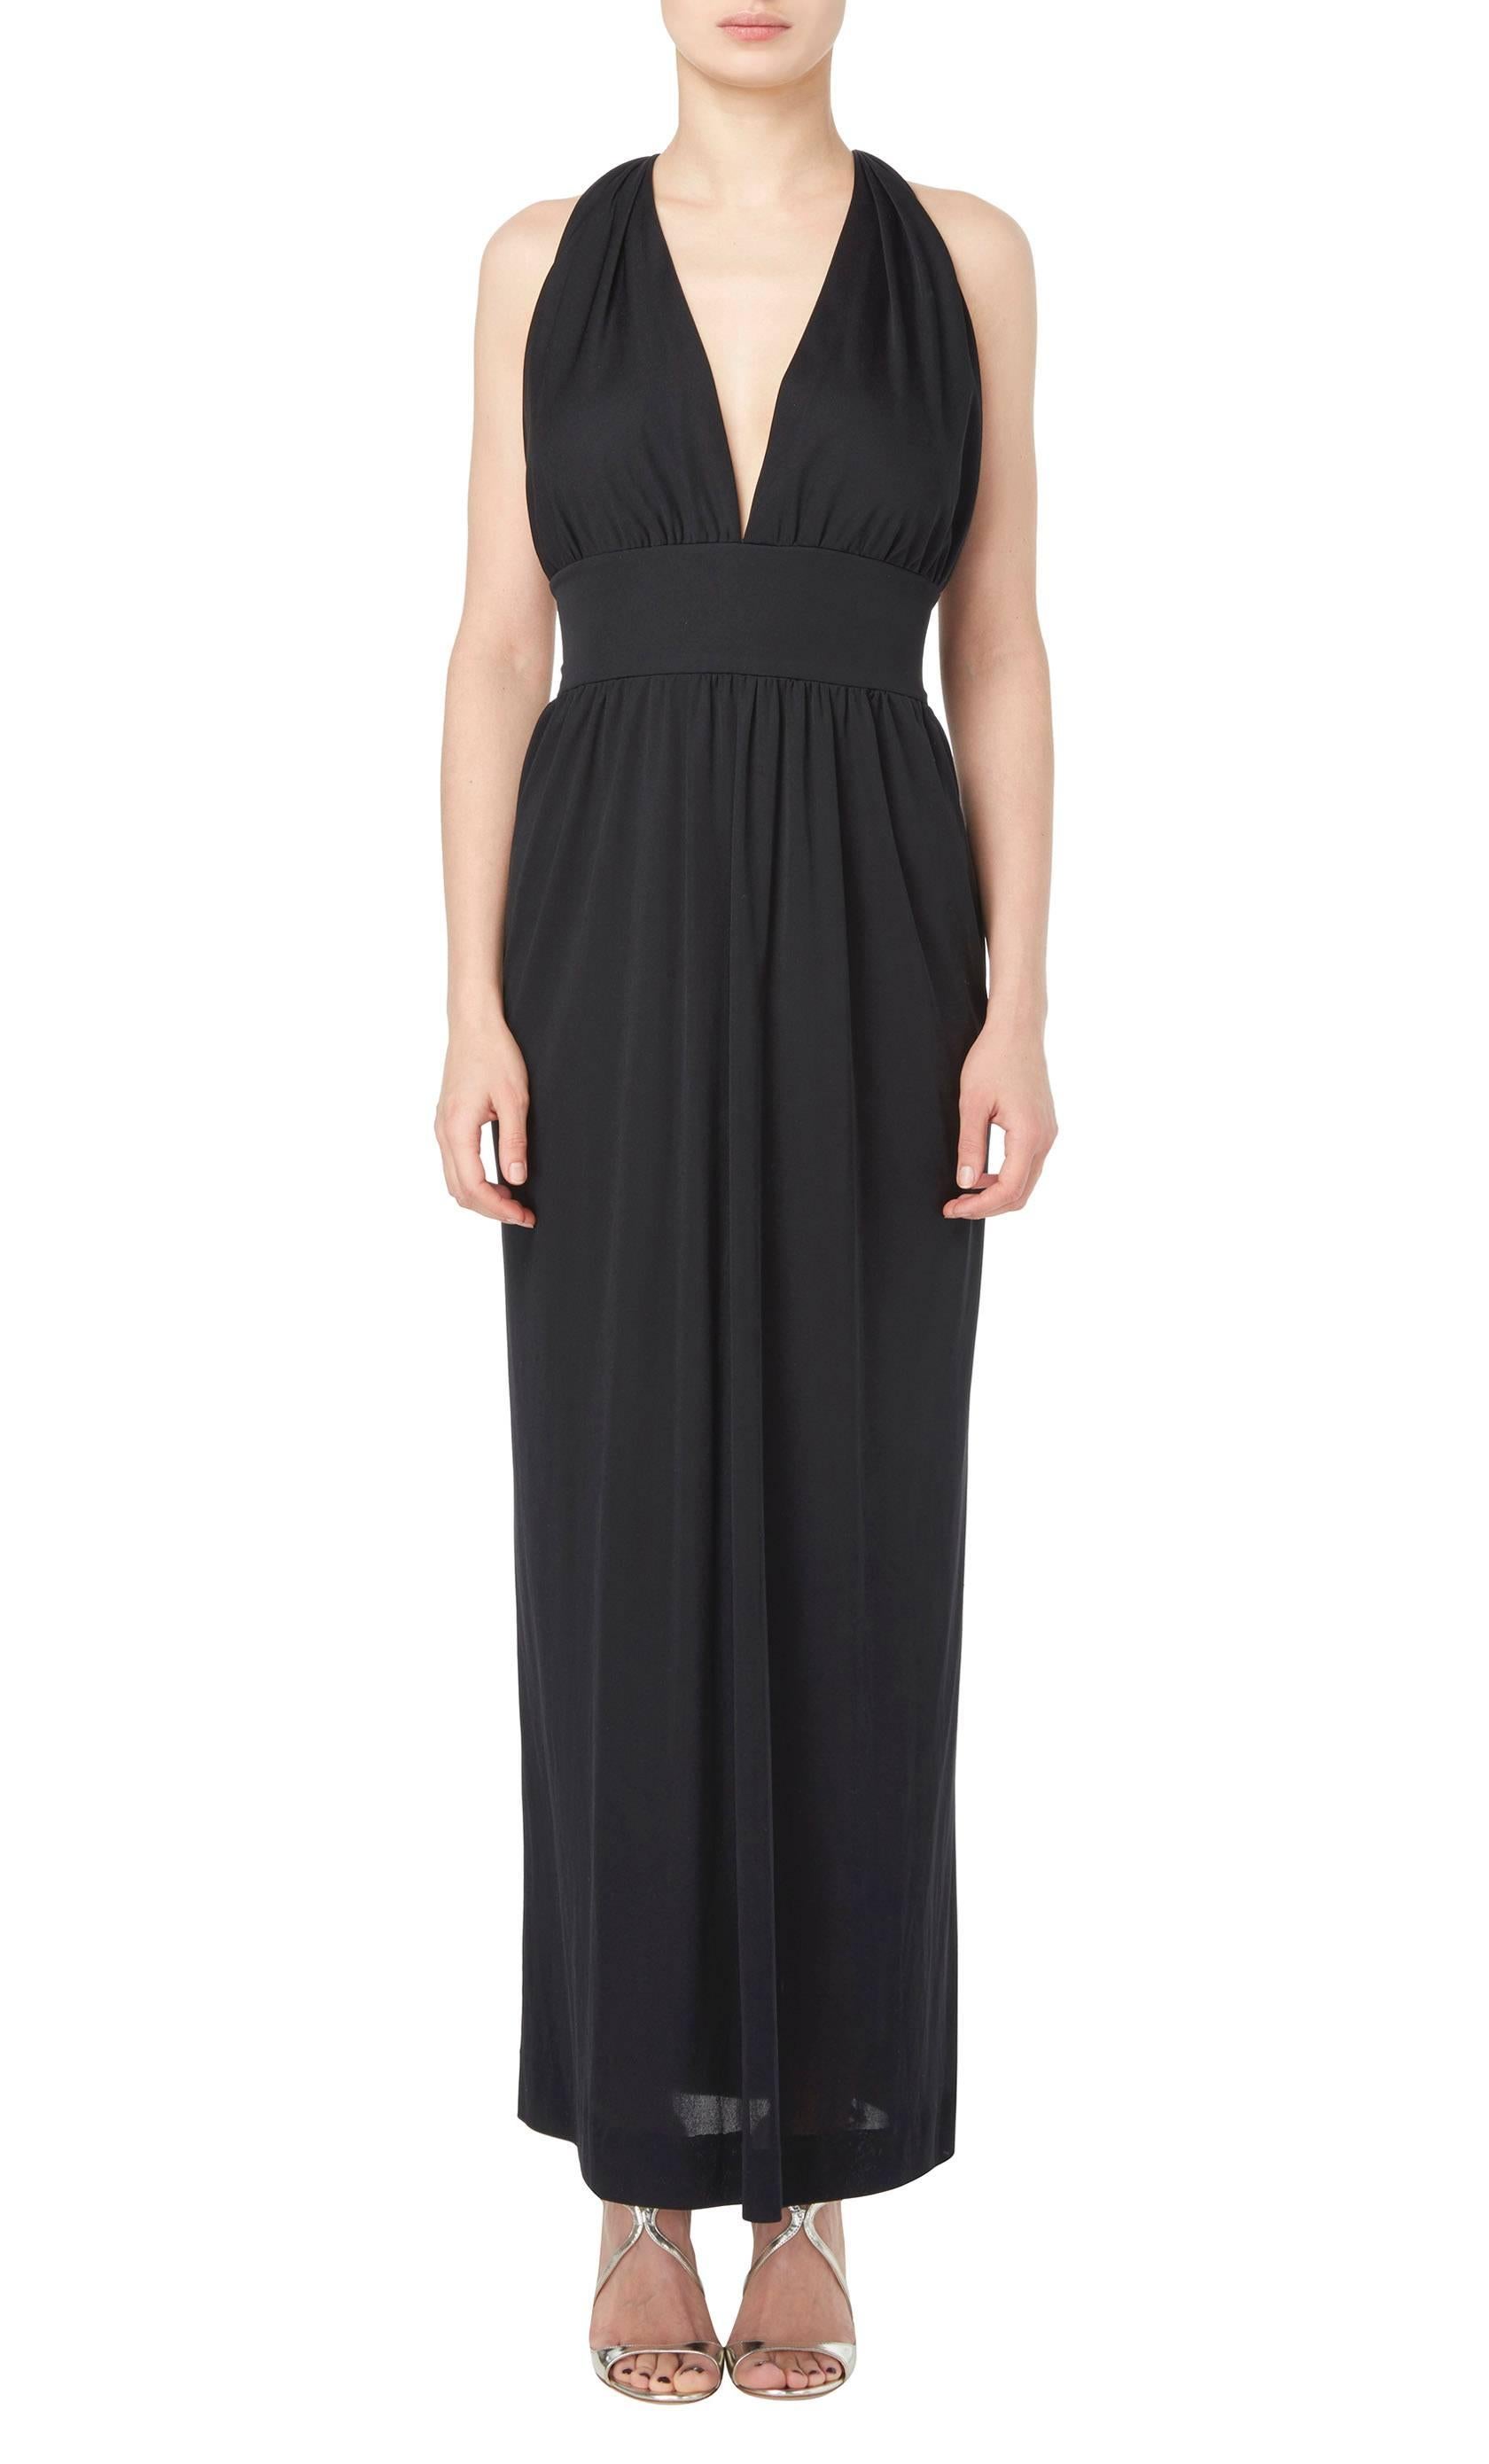 
This stunning Pucci maxi dress is the ideal summer dress, constructed in airy black silk artfully gathered over the bust, the dress has a flattering halterneck style back and a wide waistband adding definition to the silhouette. Throw on for hot